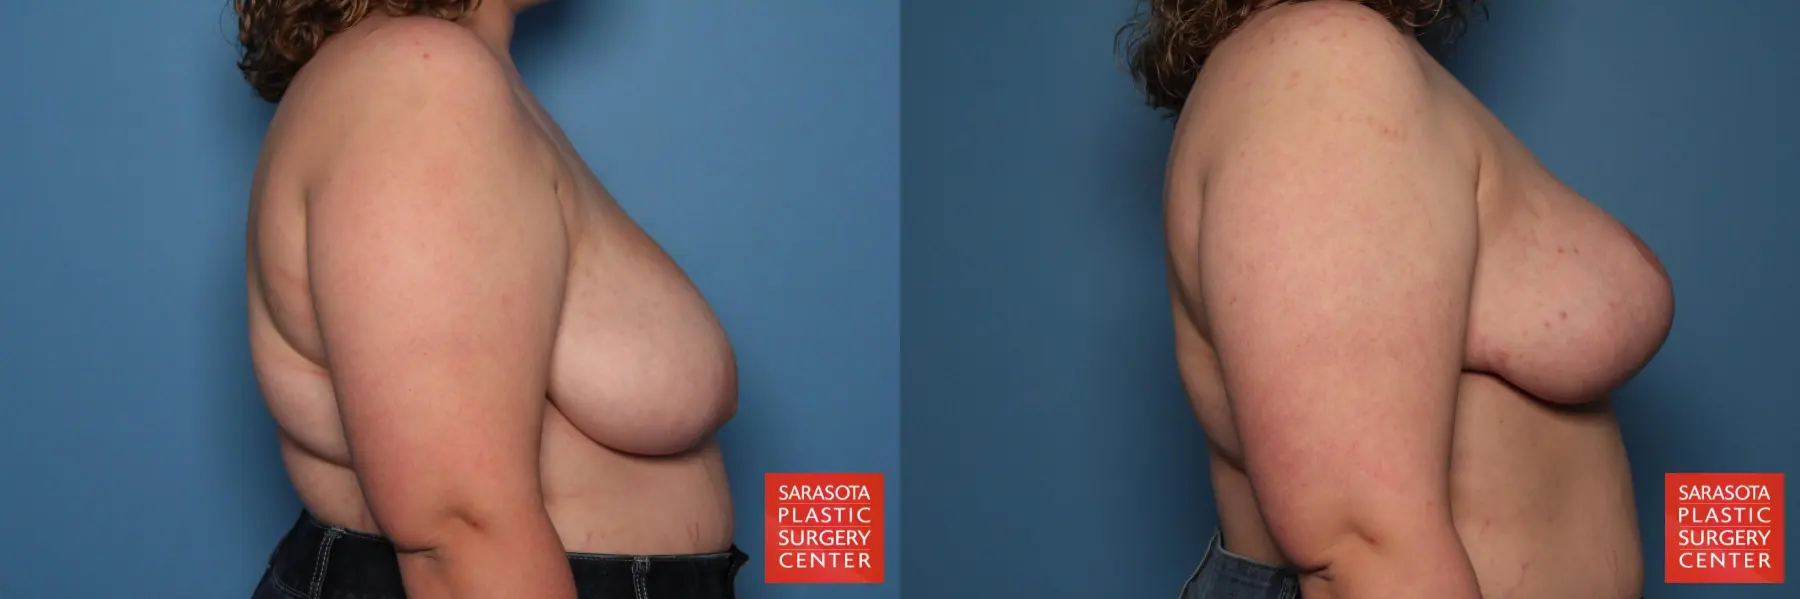 Breast Asymmetry: Patient 1 - Before and After 4